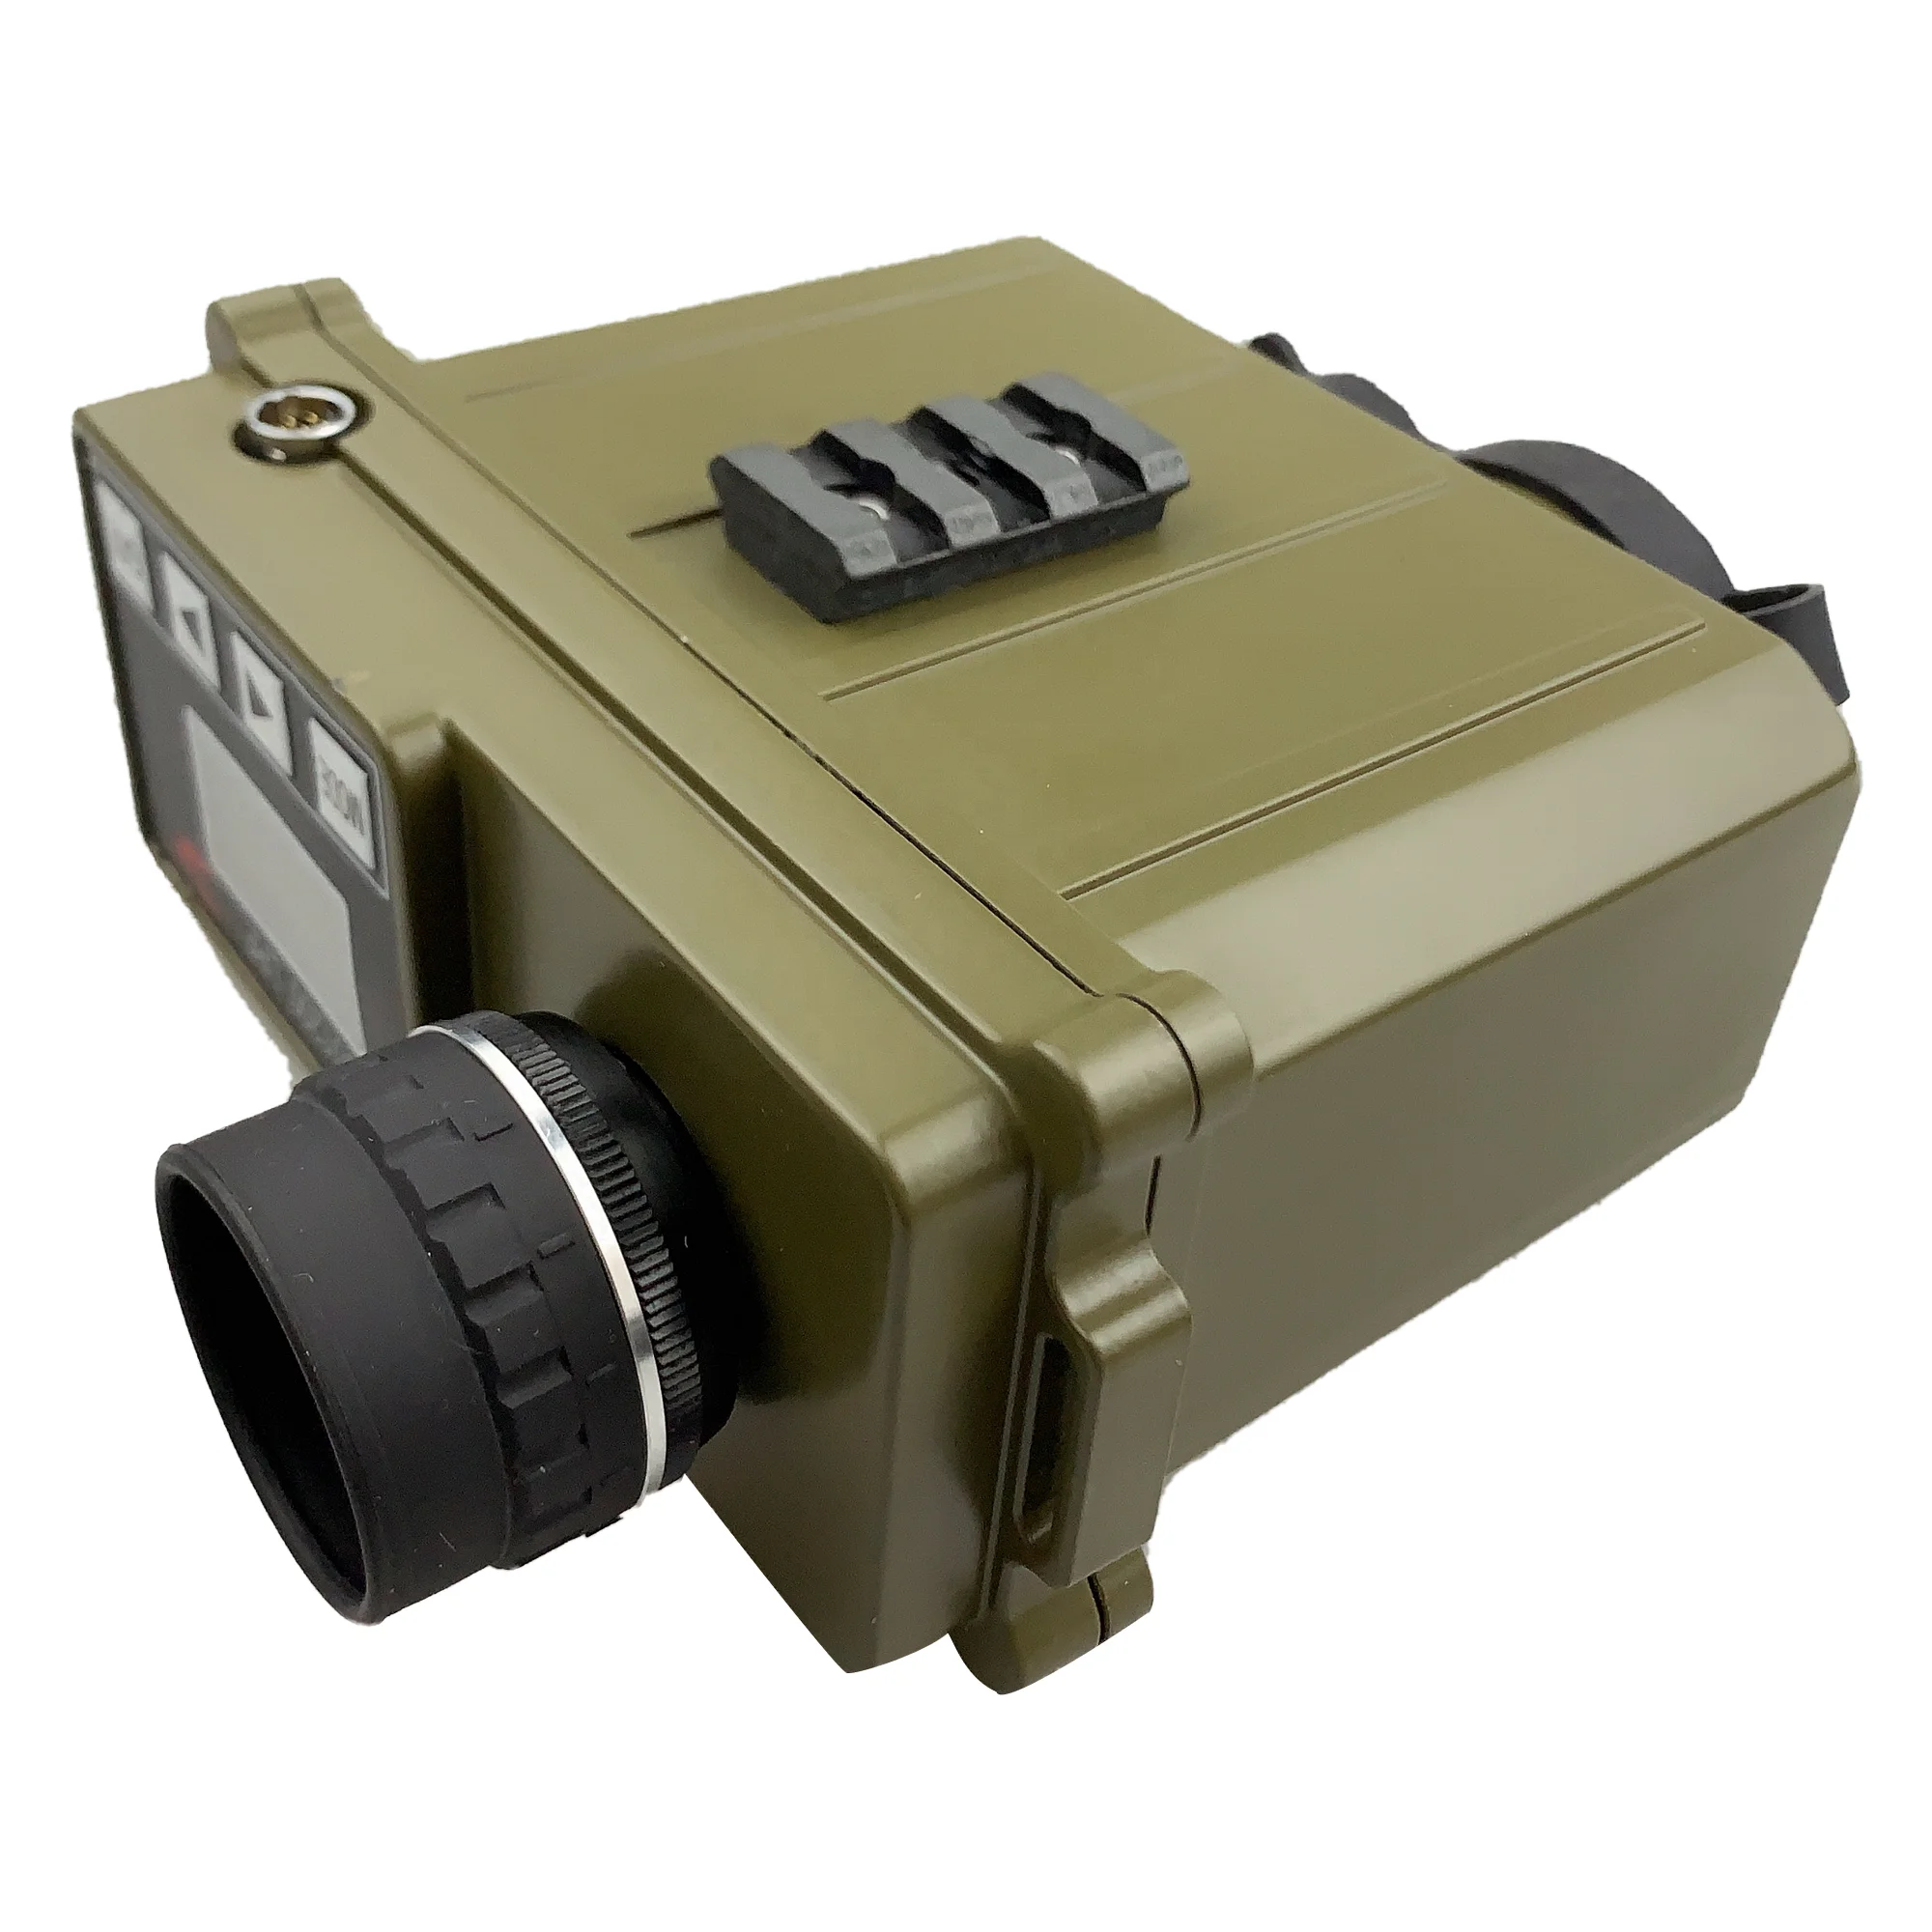 6km high accuracy military grade long range laser rangefinder for border scout